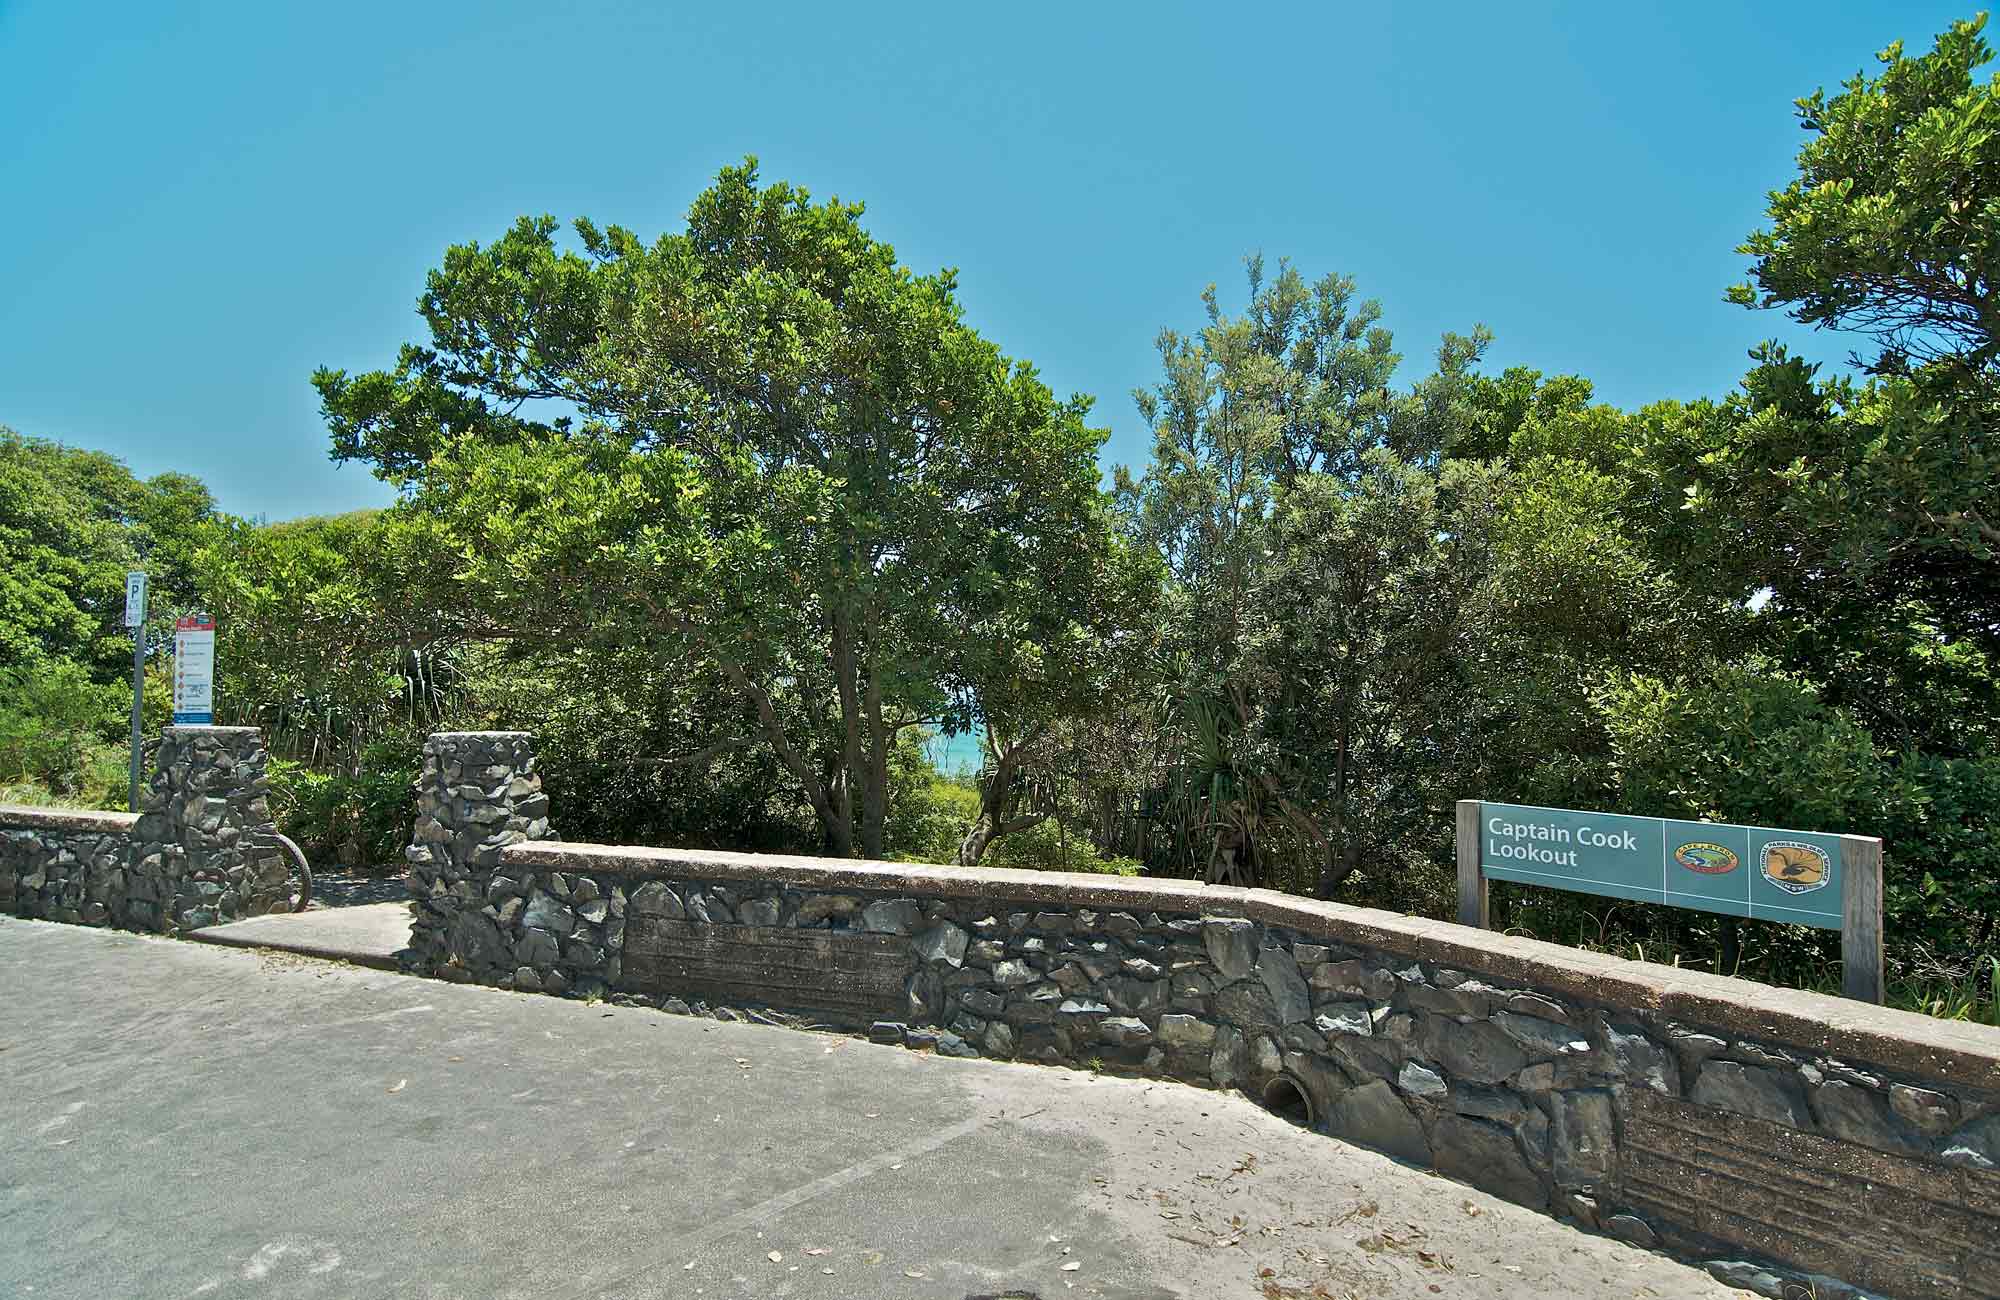 Captain Cook lookout and picnic area, Cape Byron State Conservation Area. Photo: John Spencer